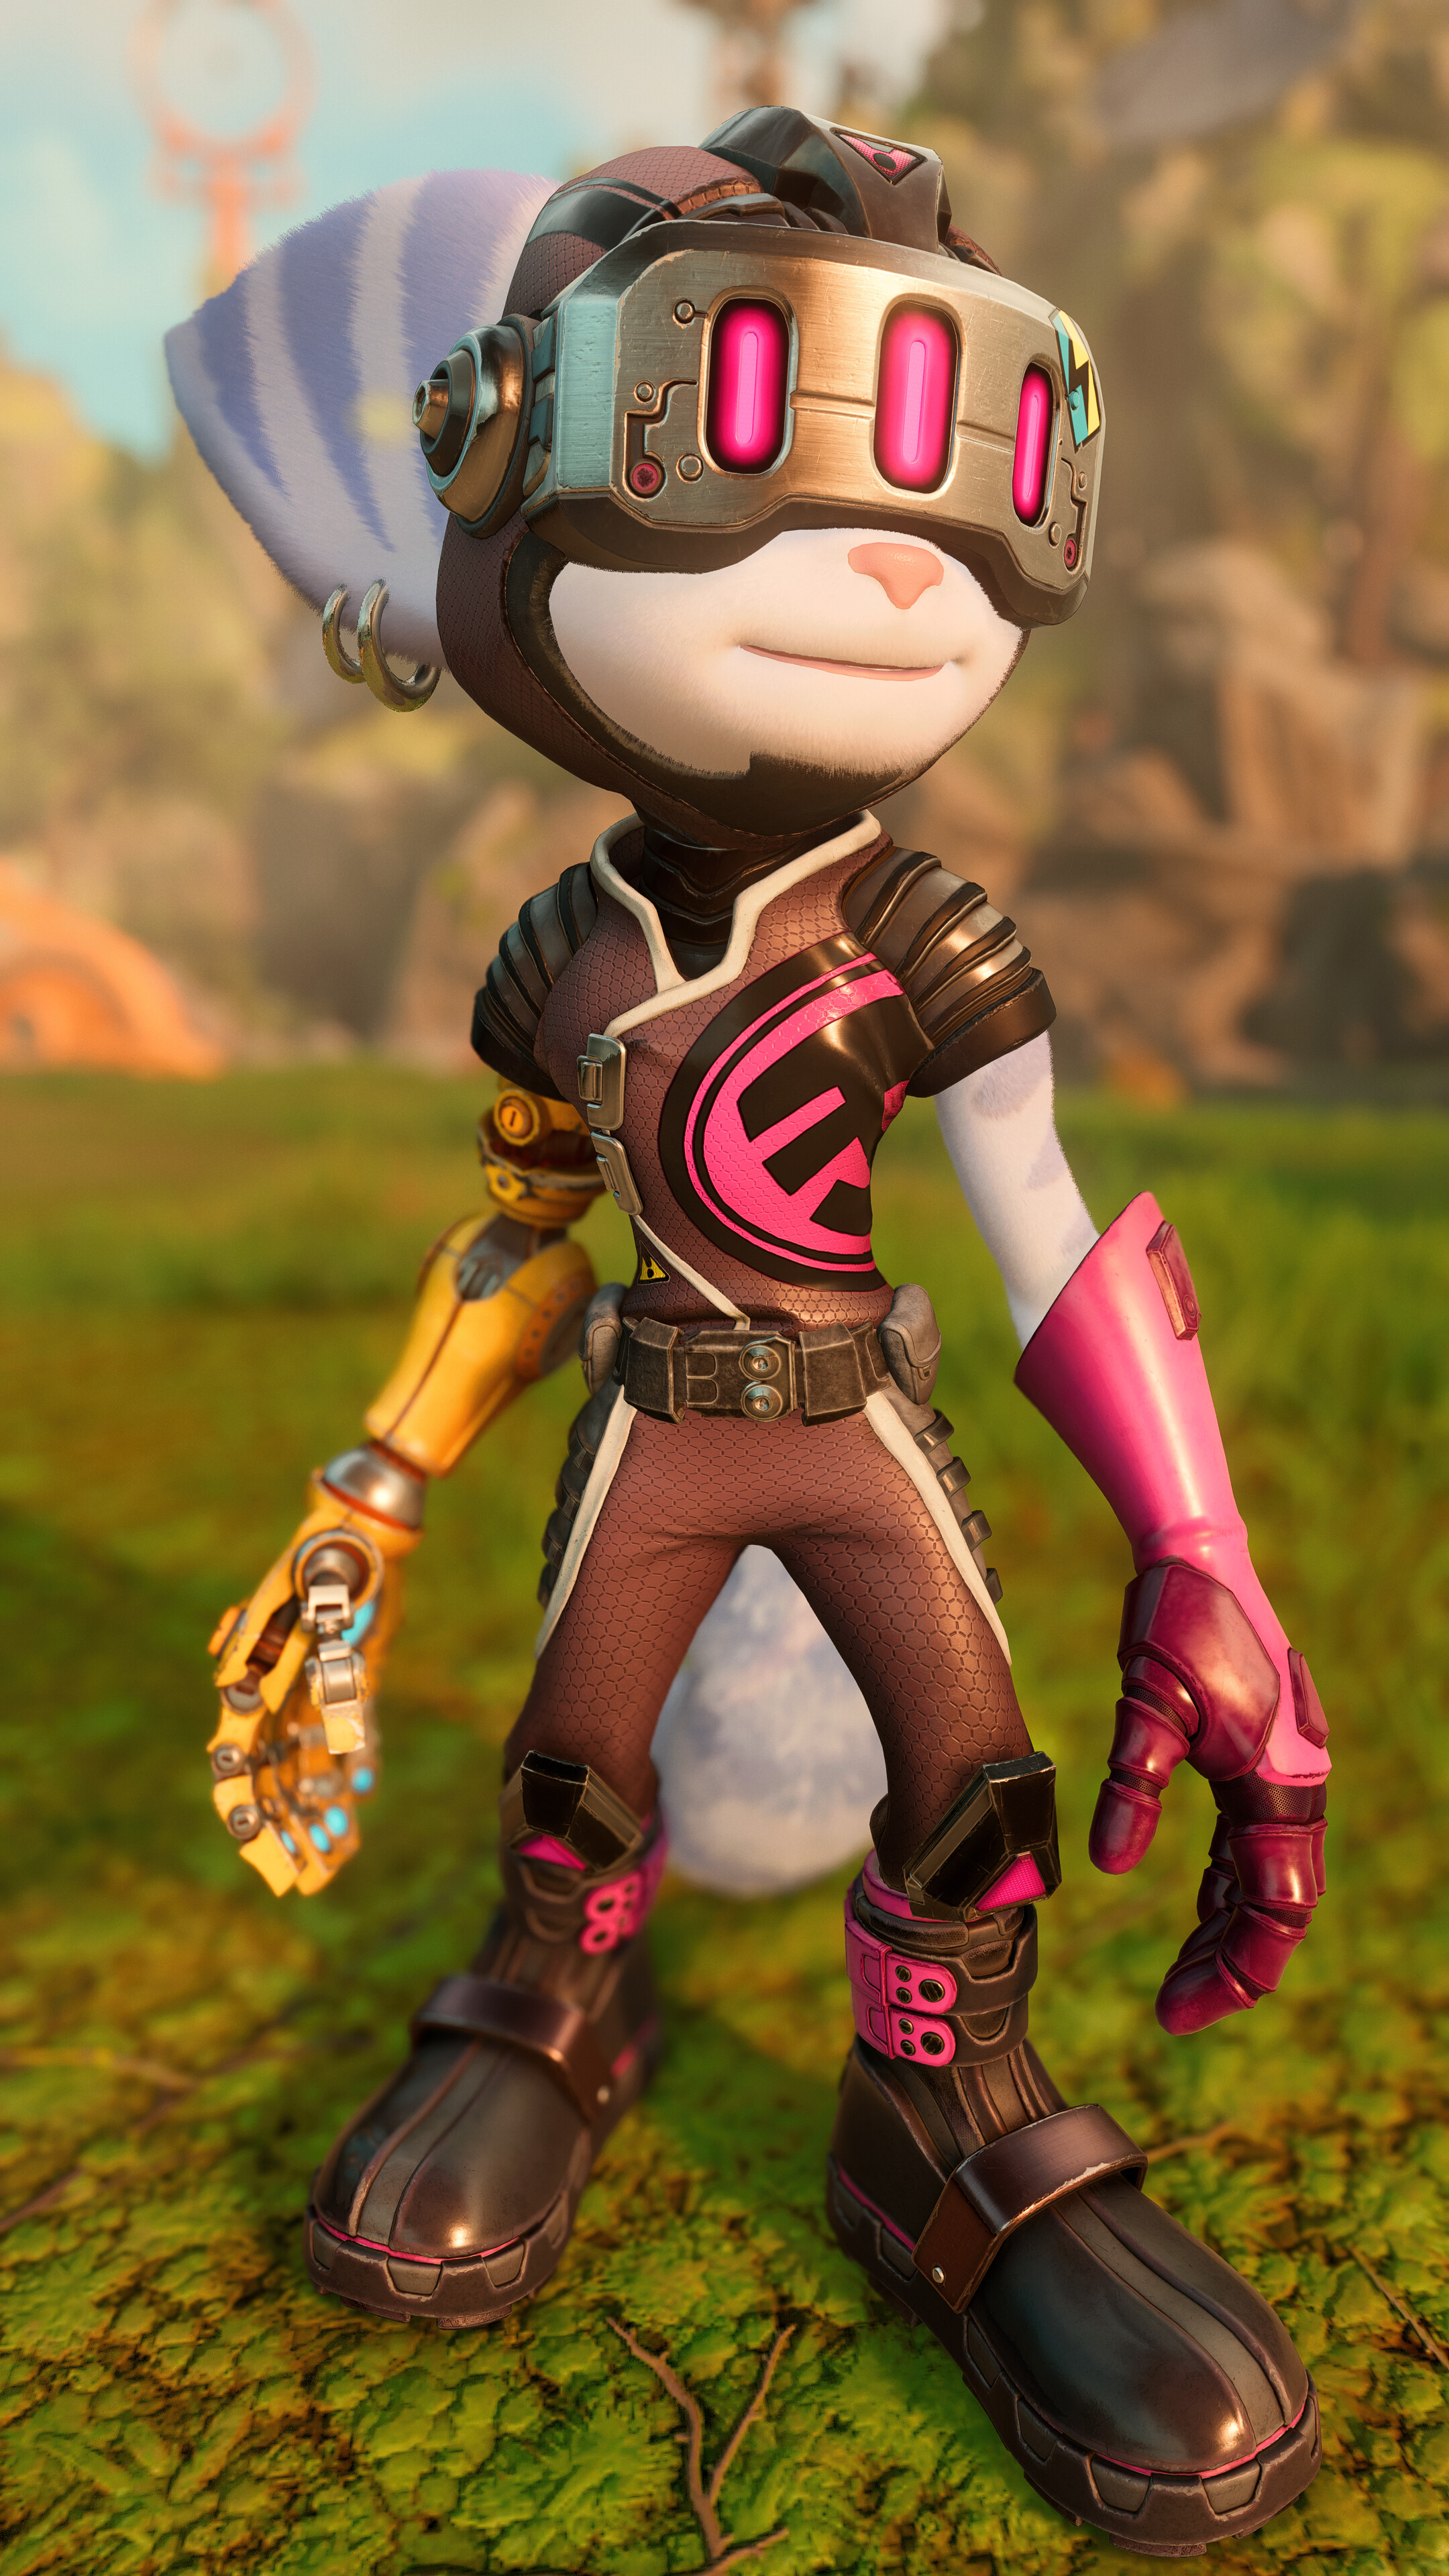 Ratchet and Clank: Rift Apart: An anthropomorphic character known as a Lombax, His first appearance was on Planet Veldin. 2160x3840 4K Wallpaper.